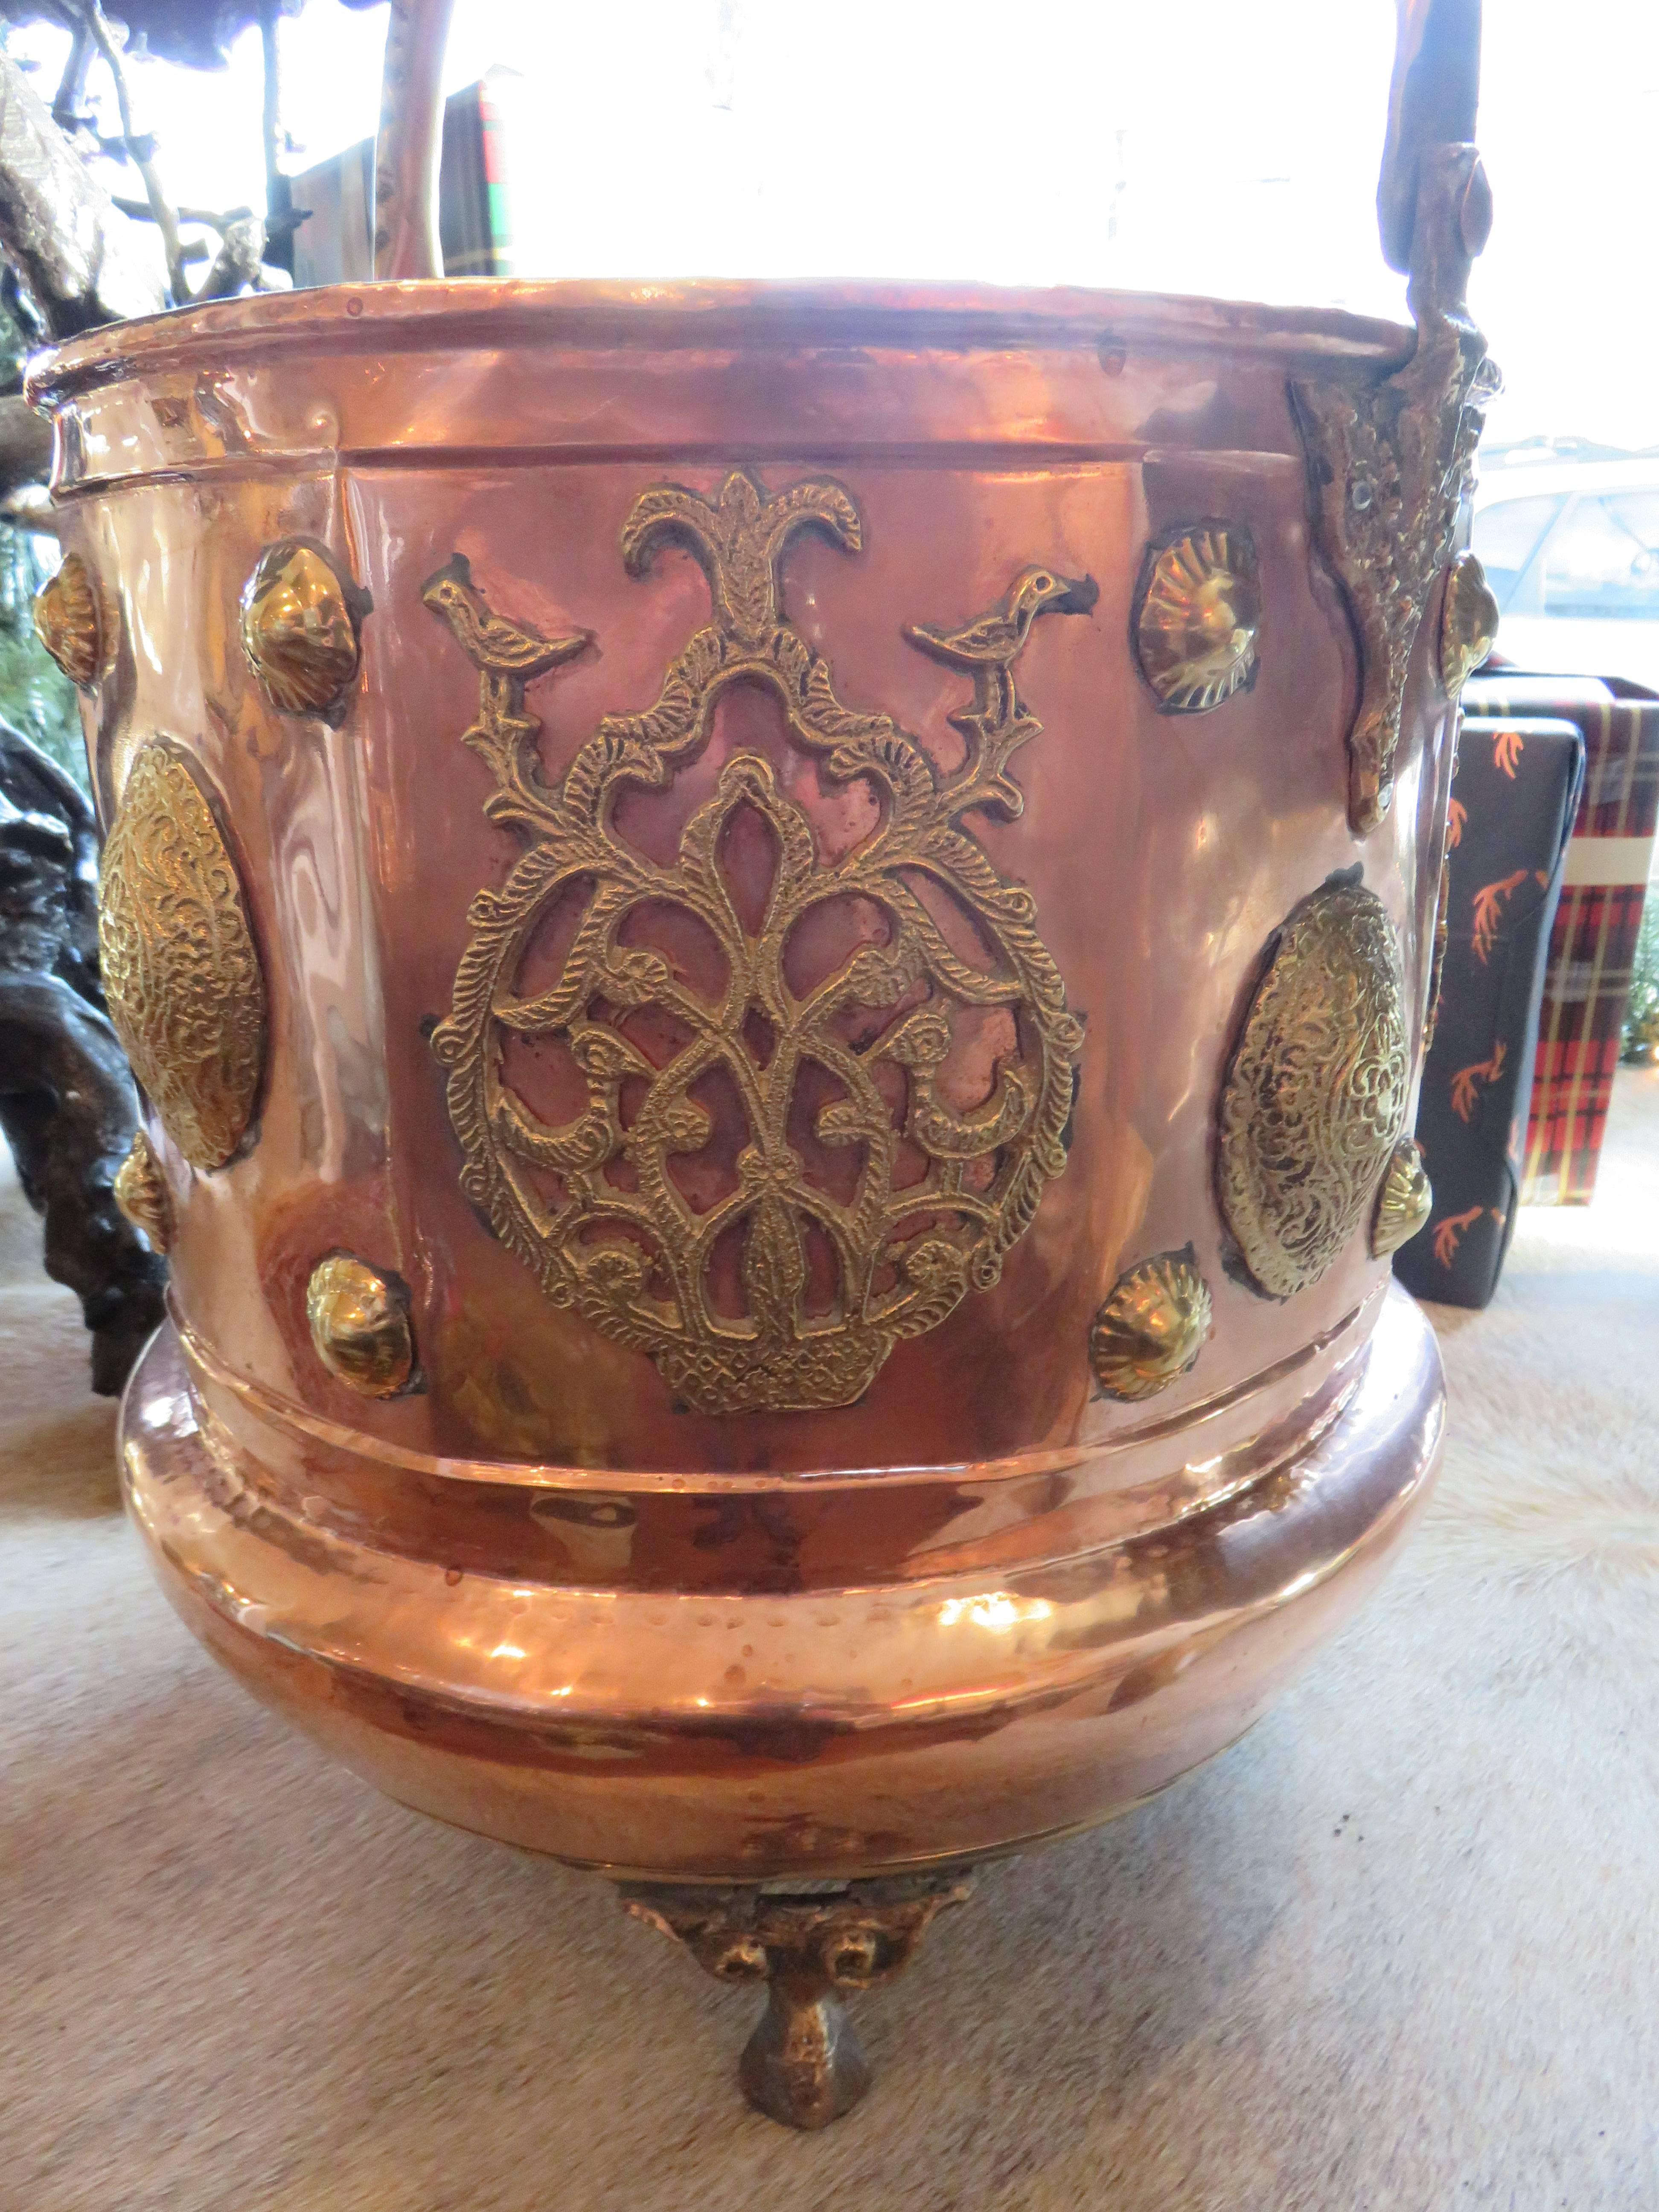 A magnificent hand-hammered brass and copper coal bucket or planter.